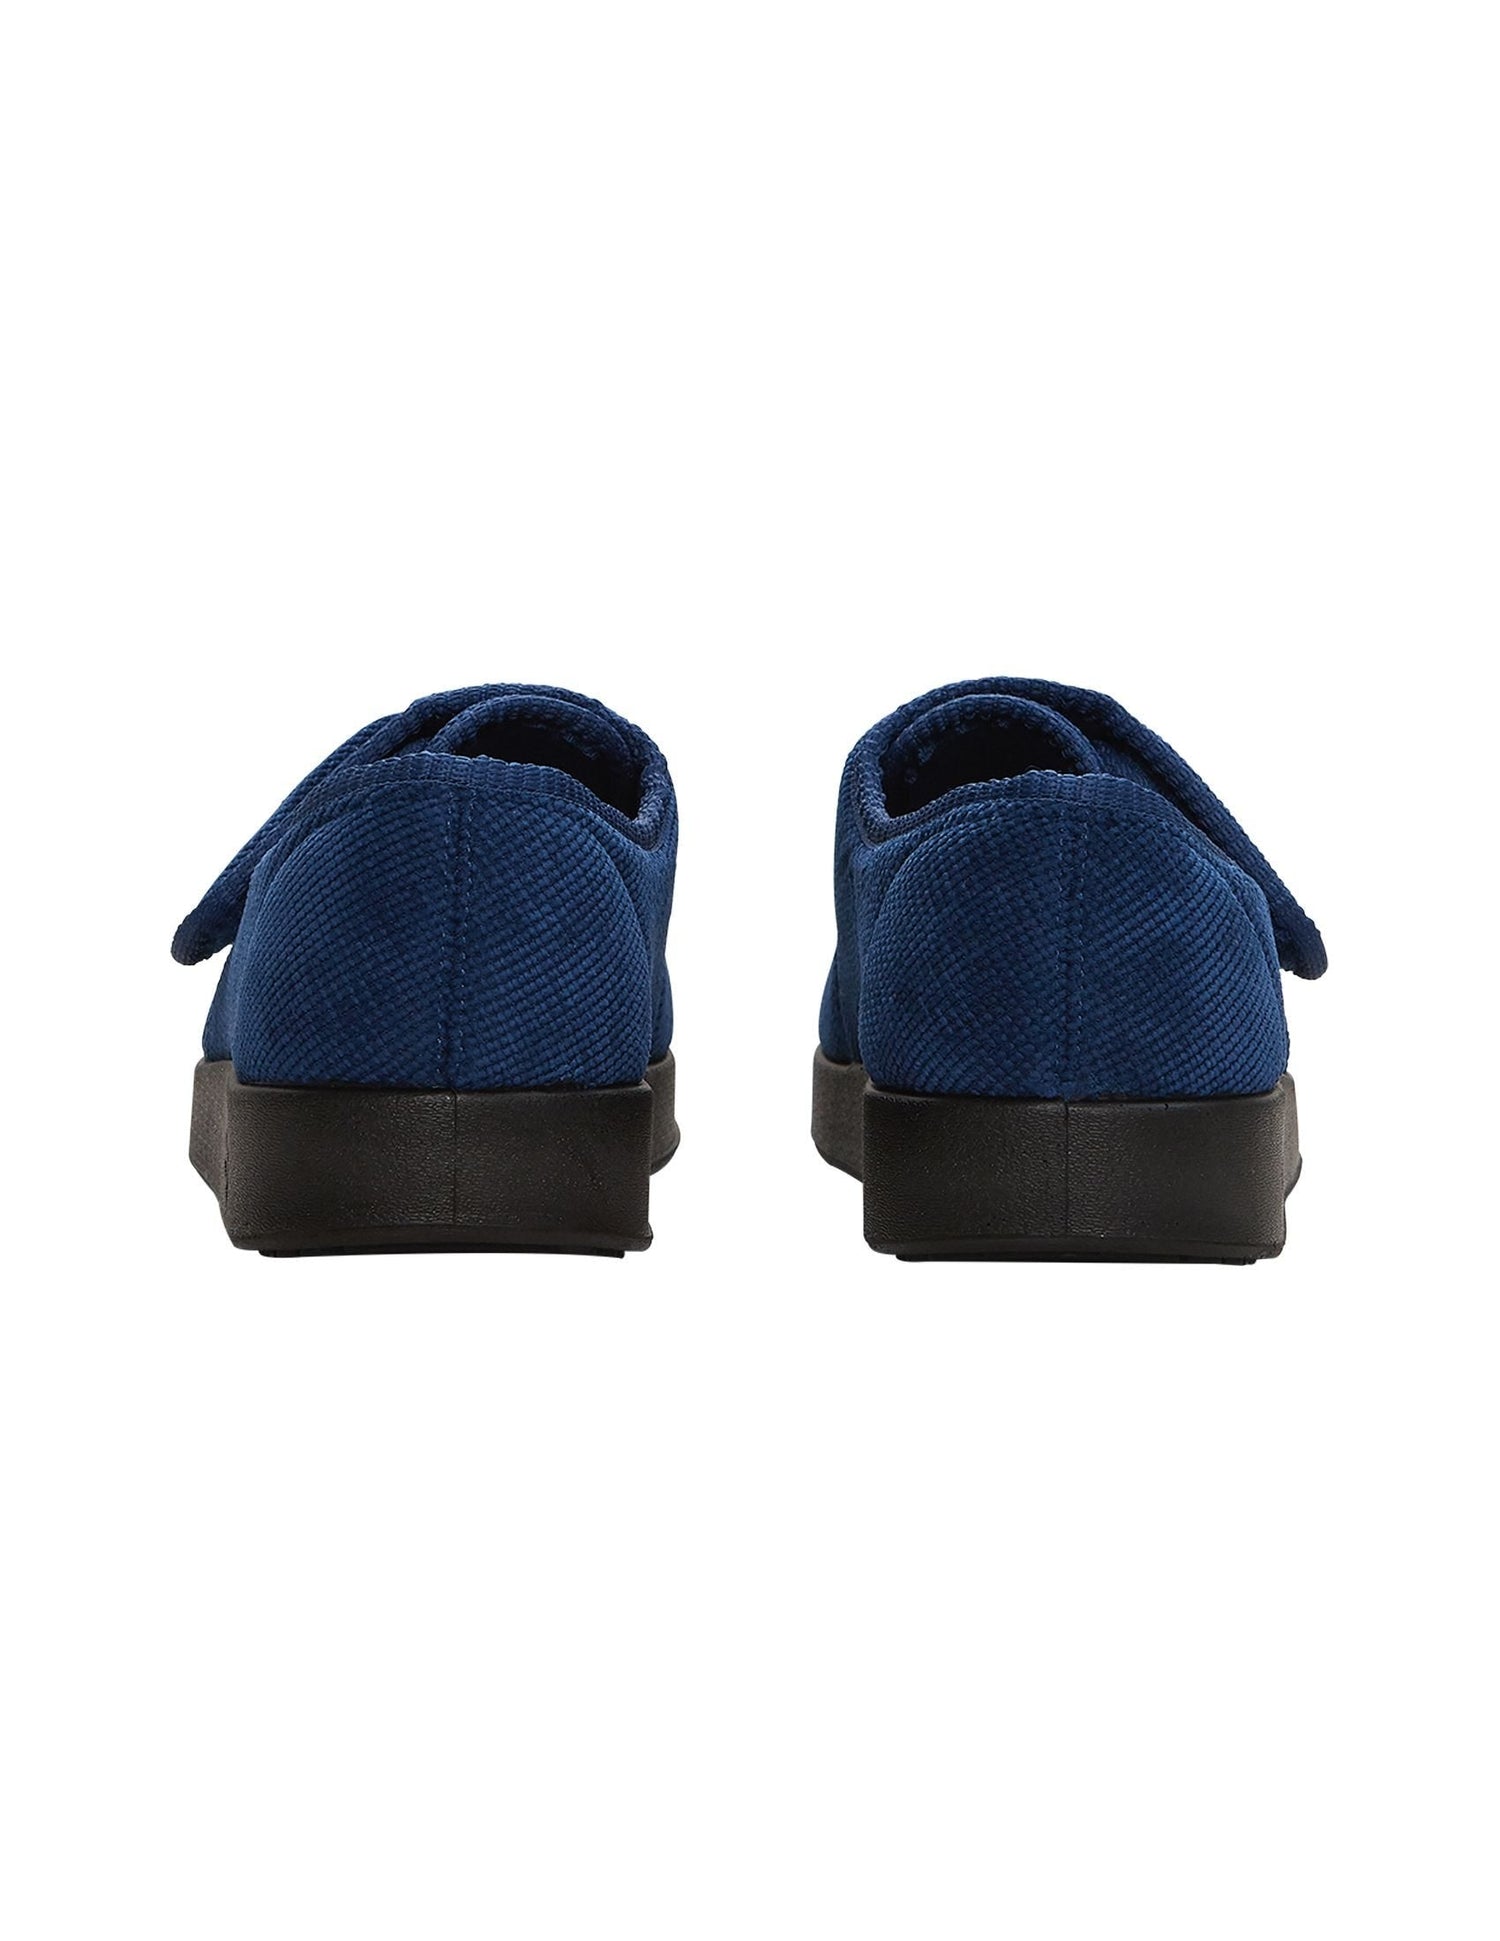 Back of soft and flexible wide navy indoor slippers with non slip black soles